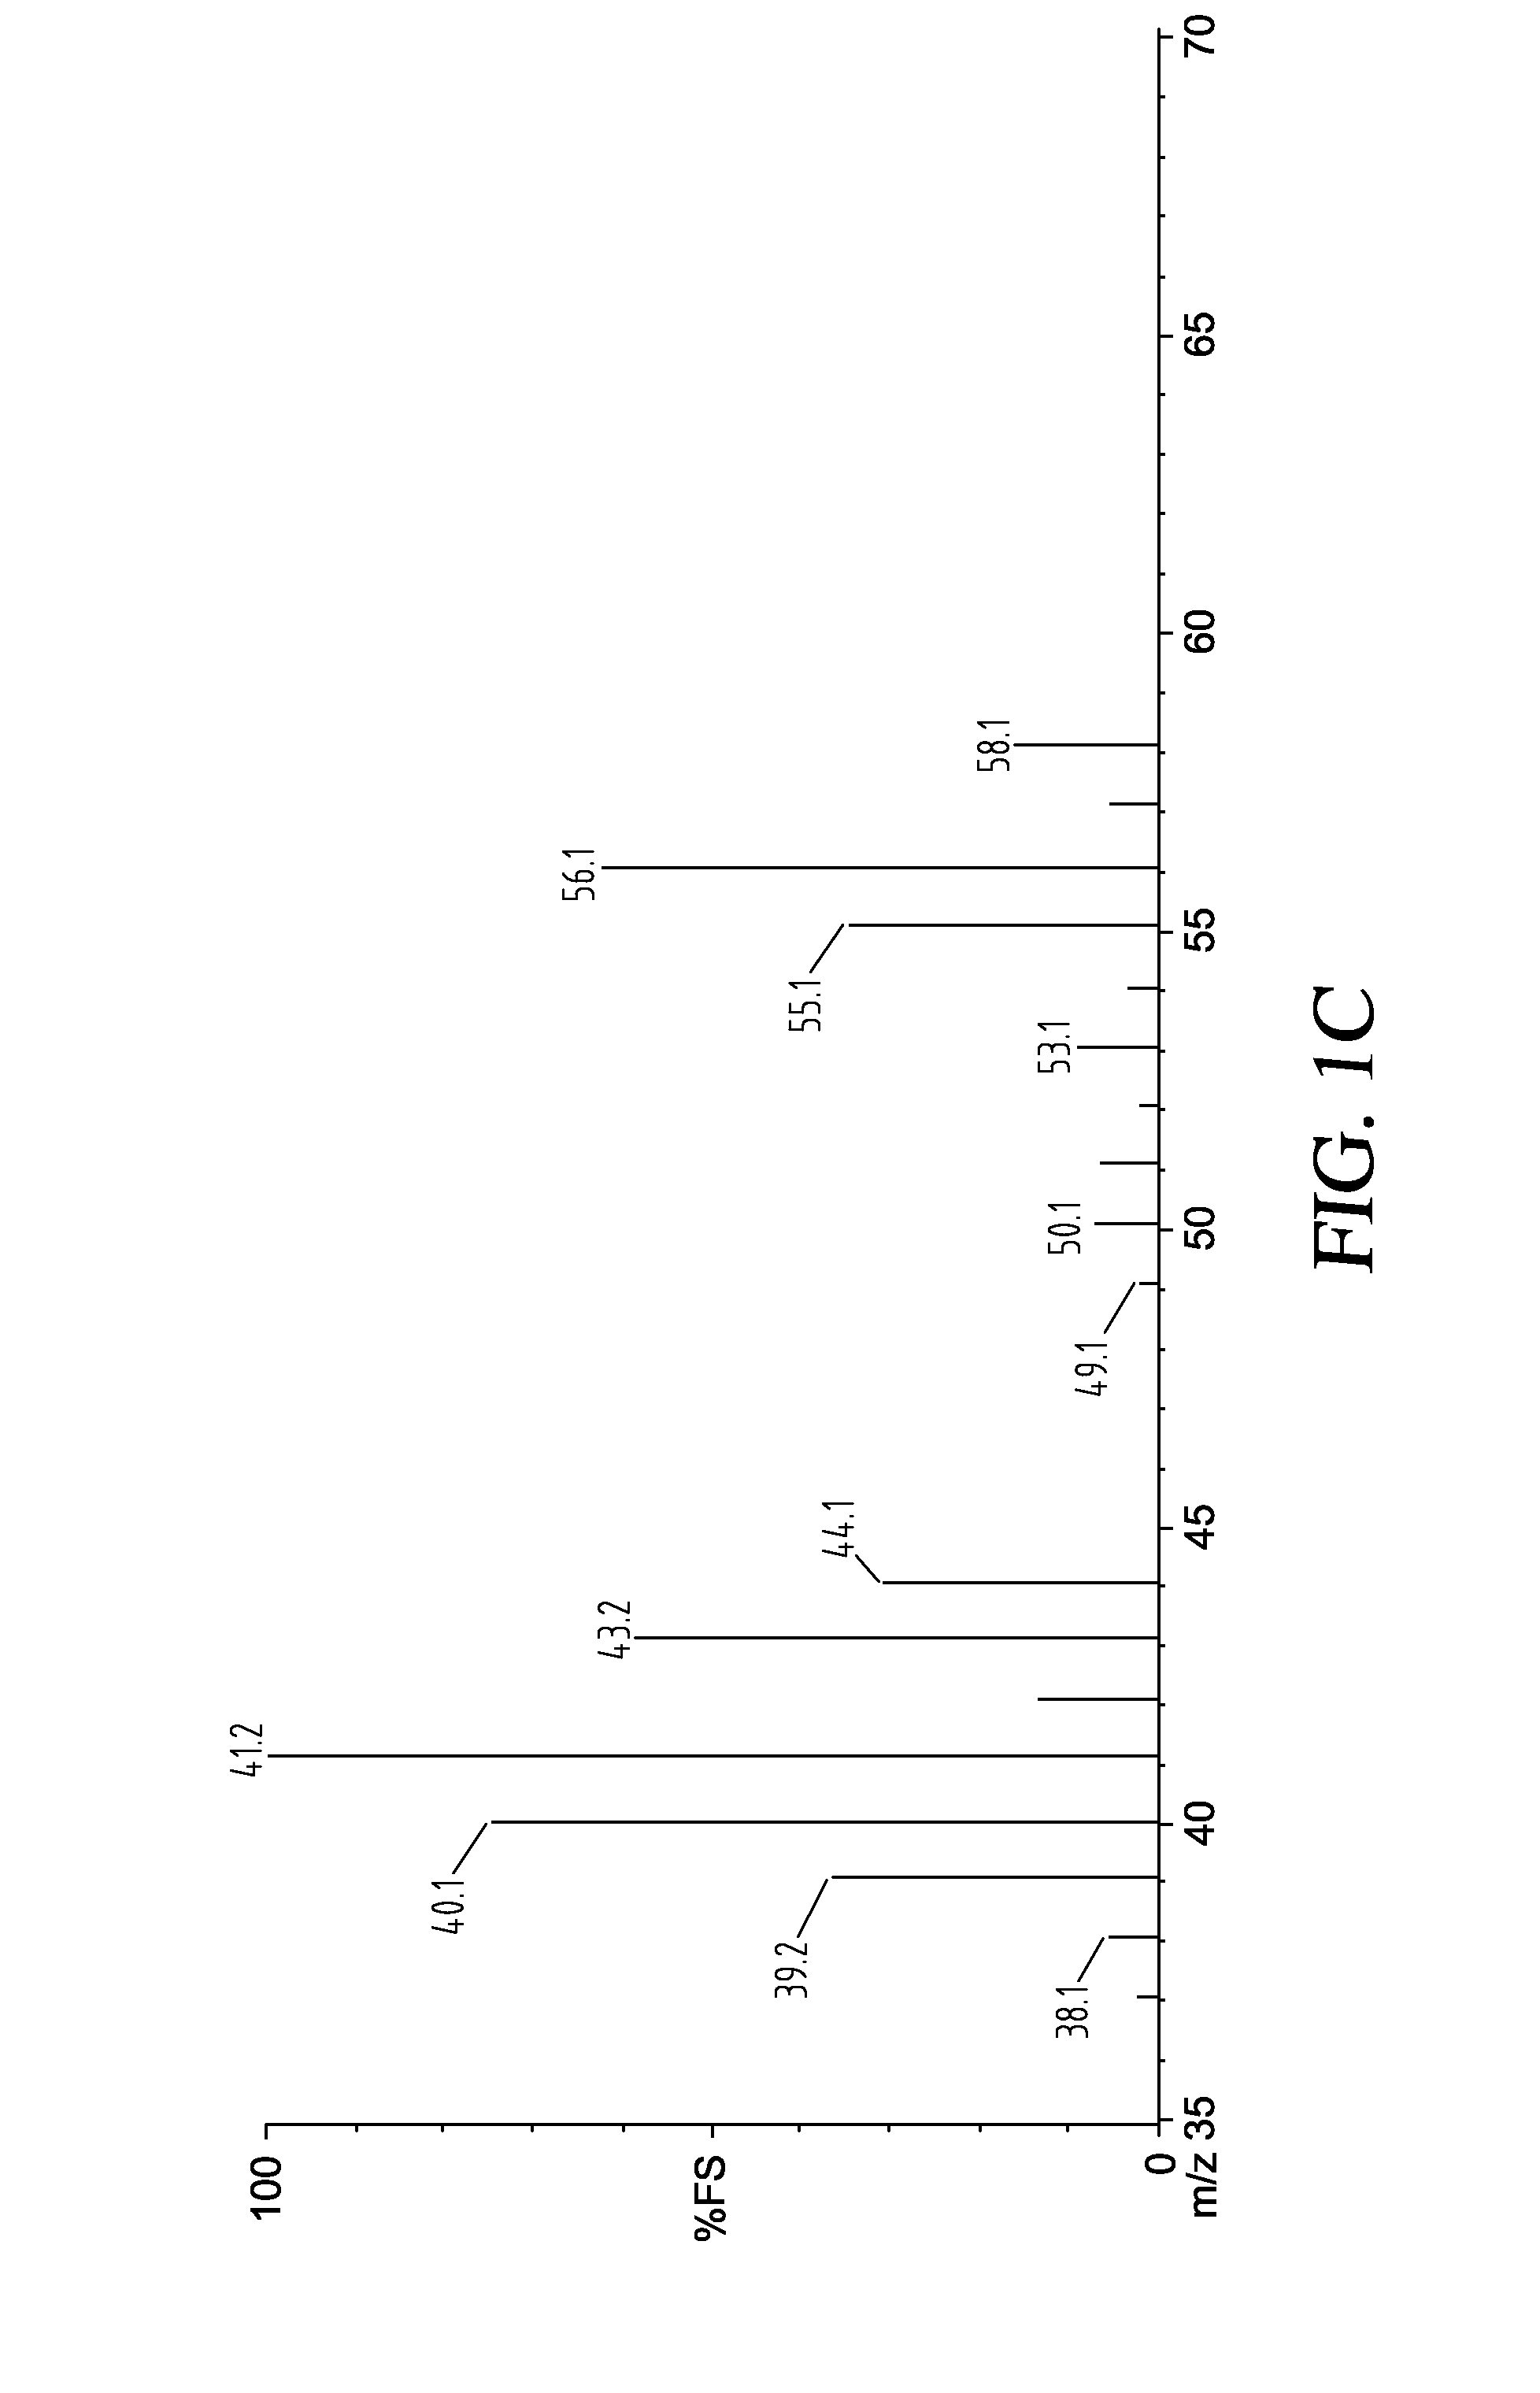 Lithium-porous metal oxide compositions and lithium reagent-porous metal compositions